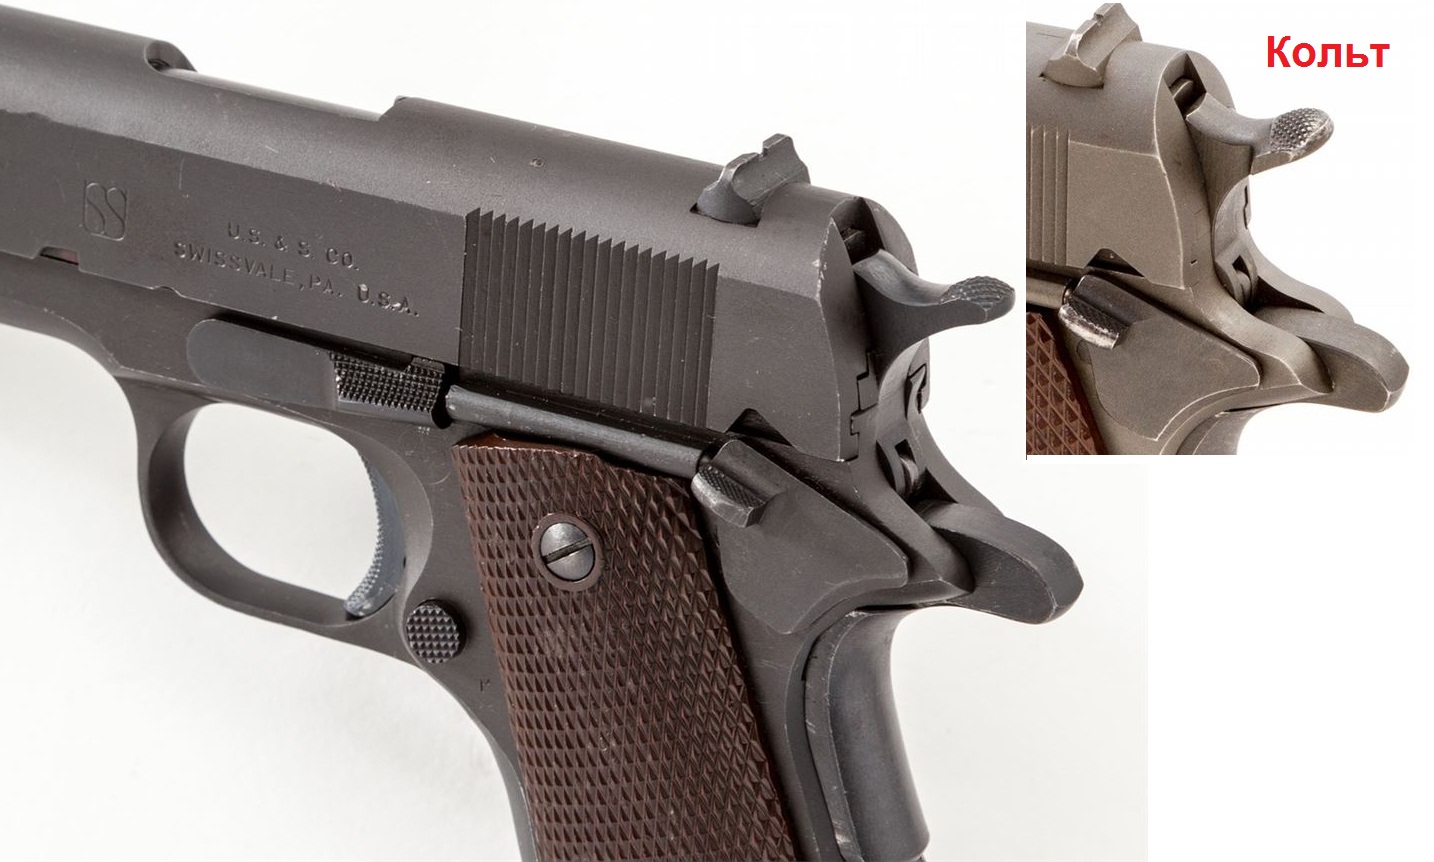 Model 1911-A1 Pistol, by Union Switch & Signal